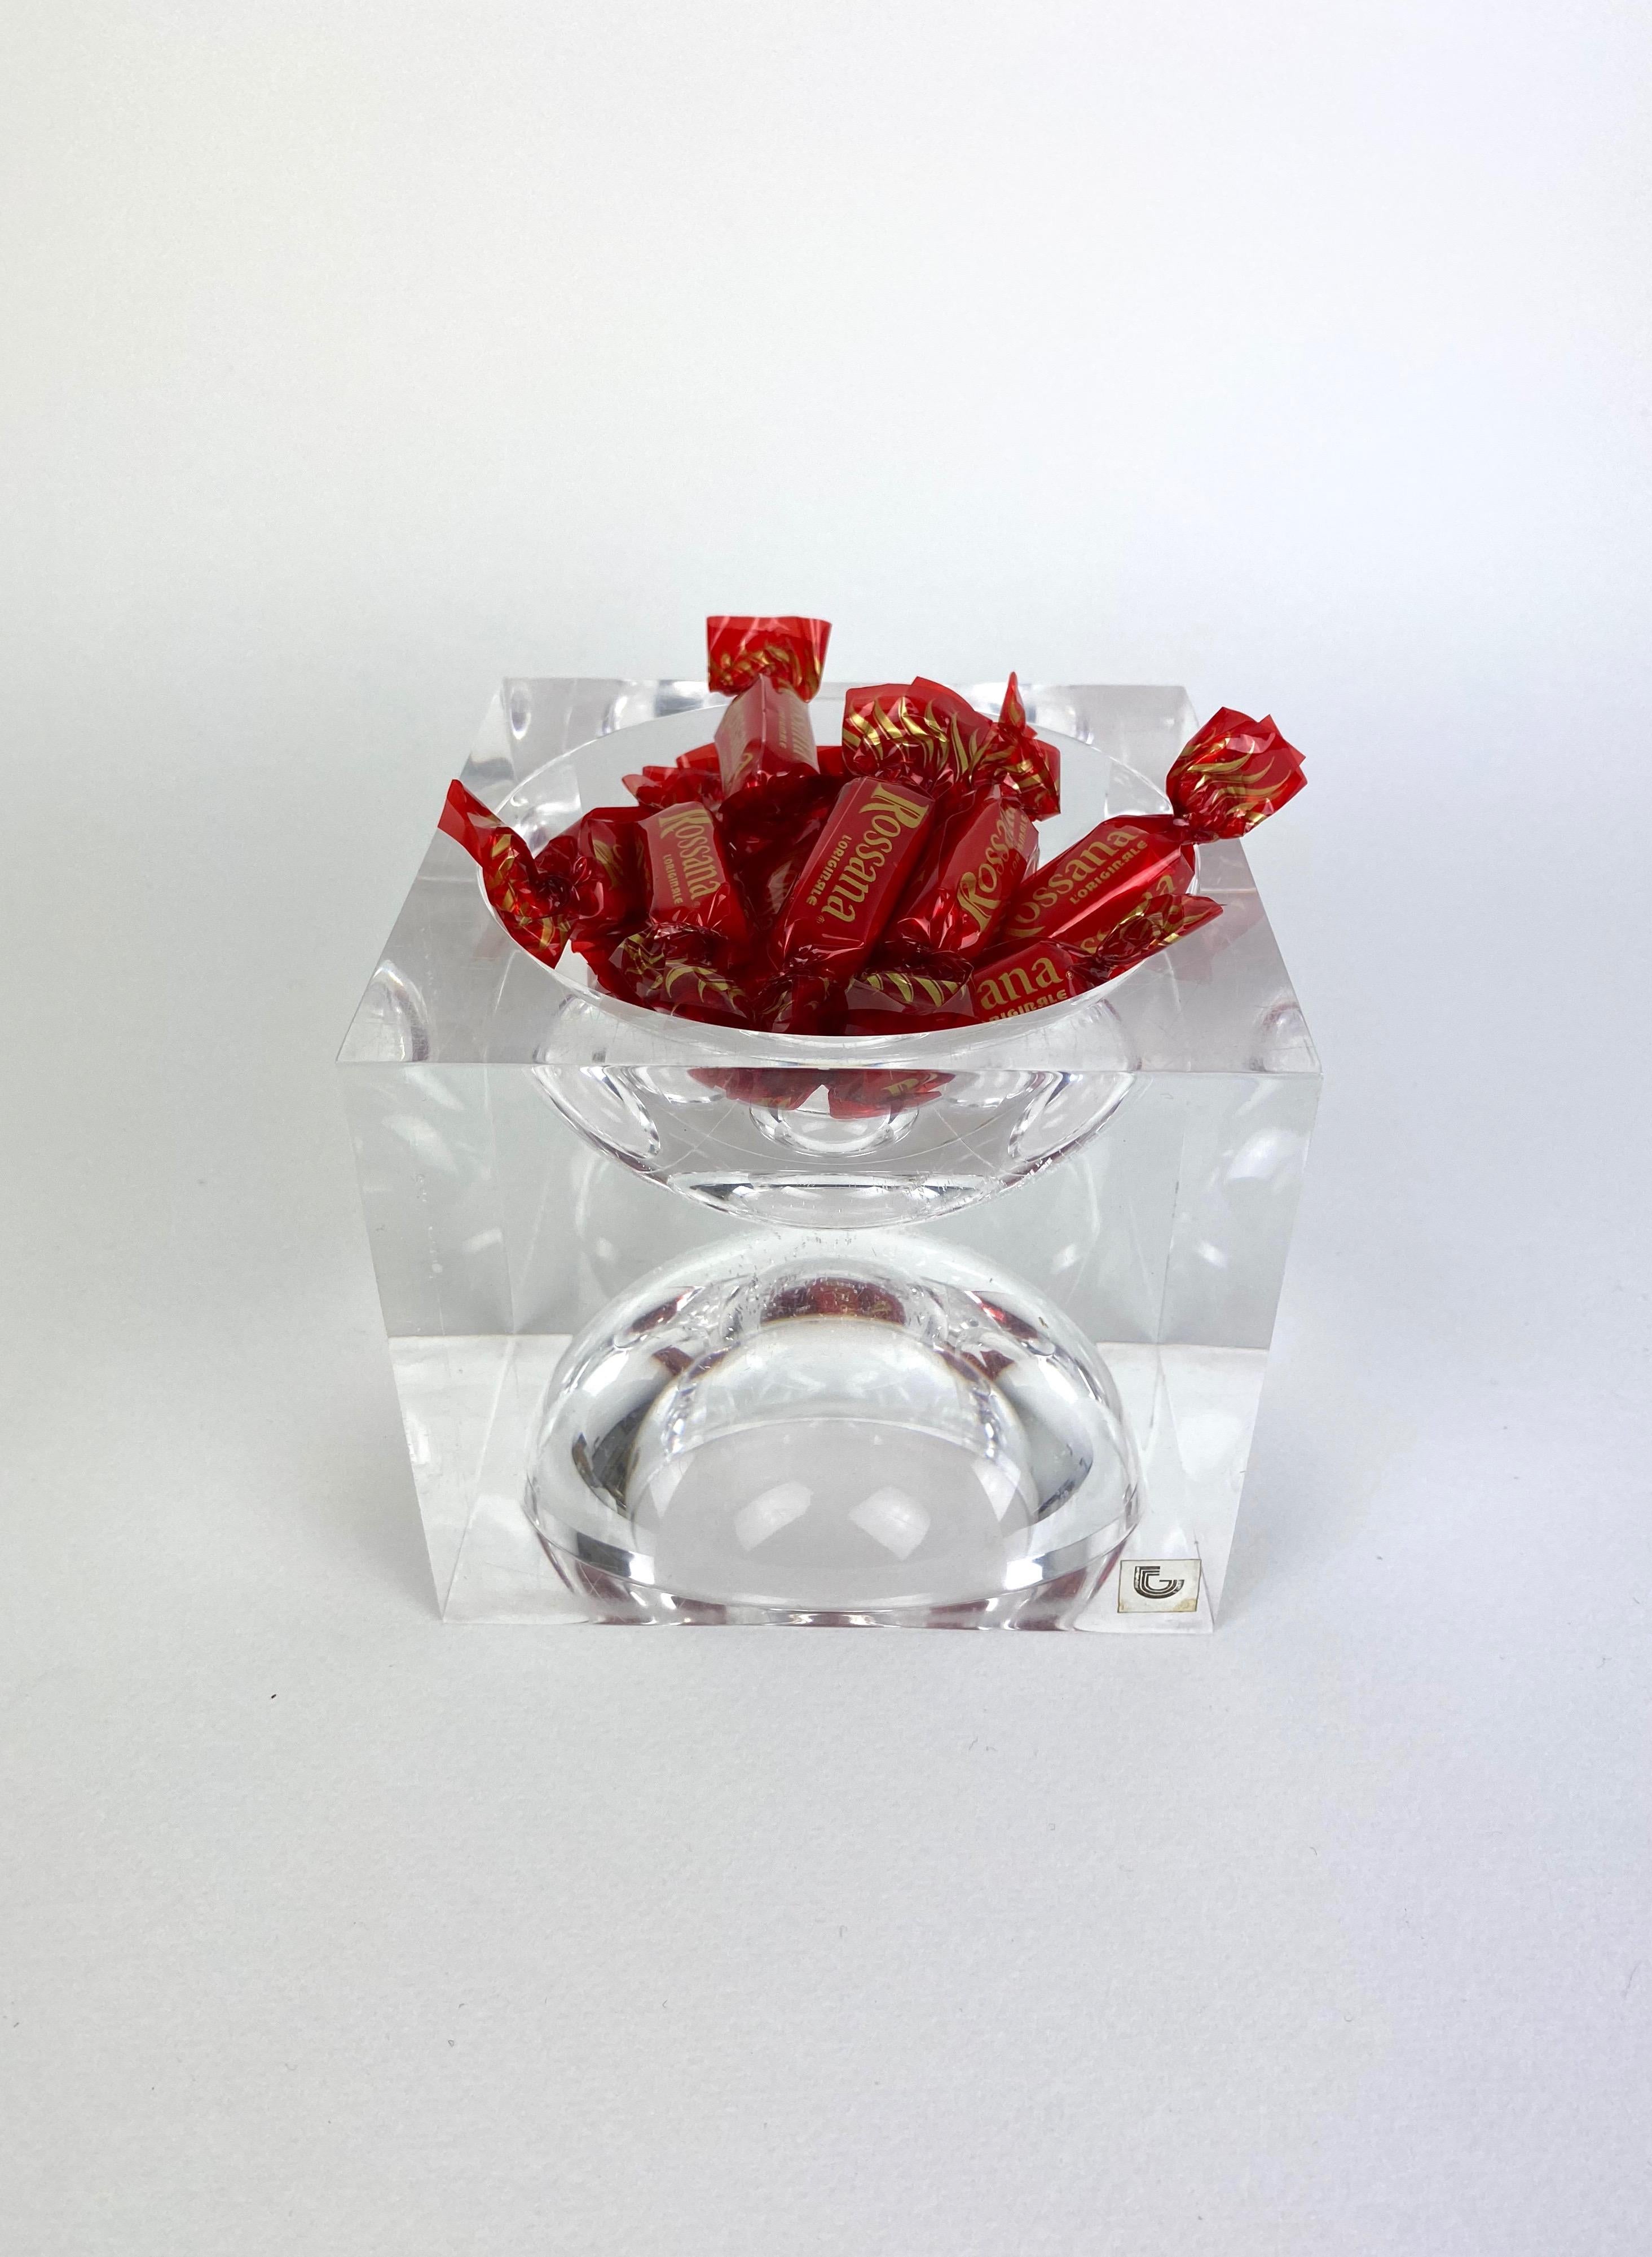 Late 20th Century Lucite Acrylic Cubic Sculpture by Team Guzzini, Italy, 1970s Spiral Geometry